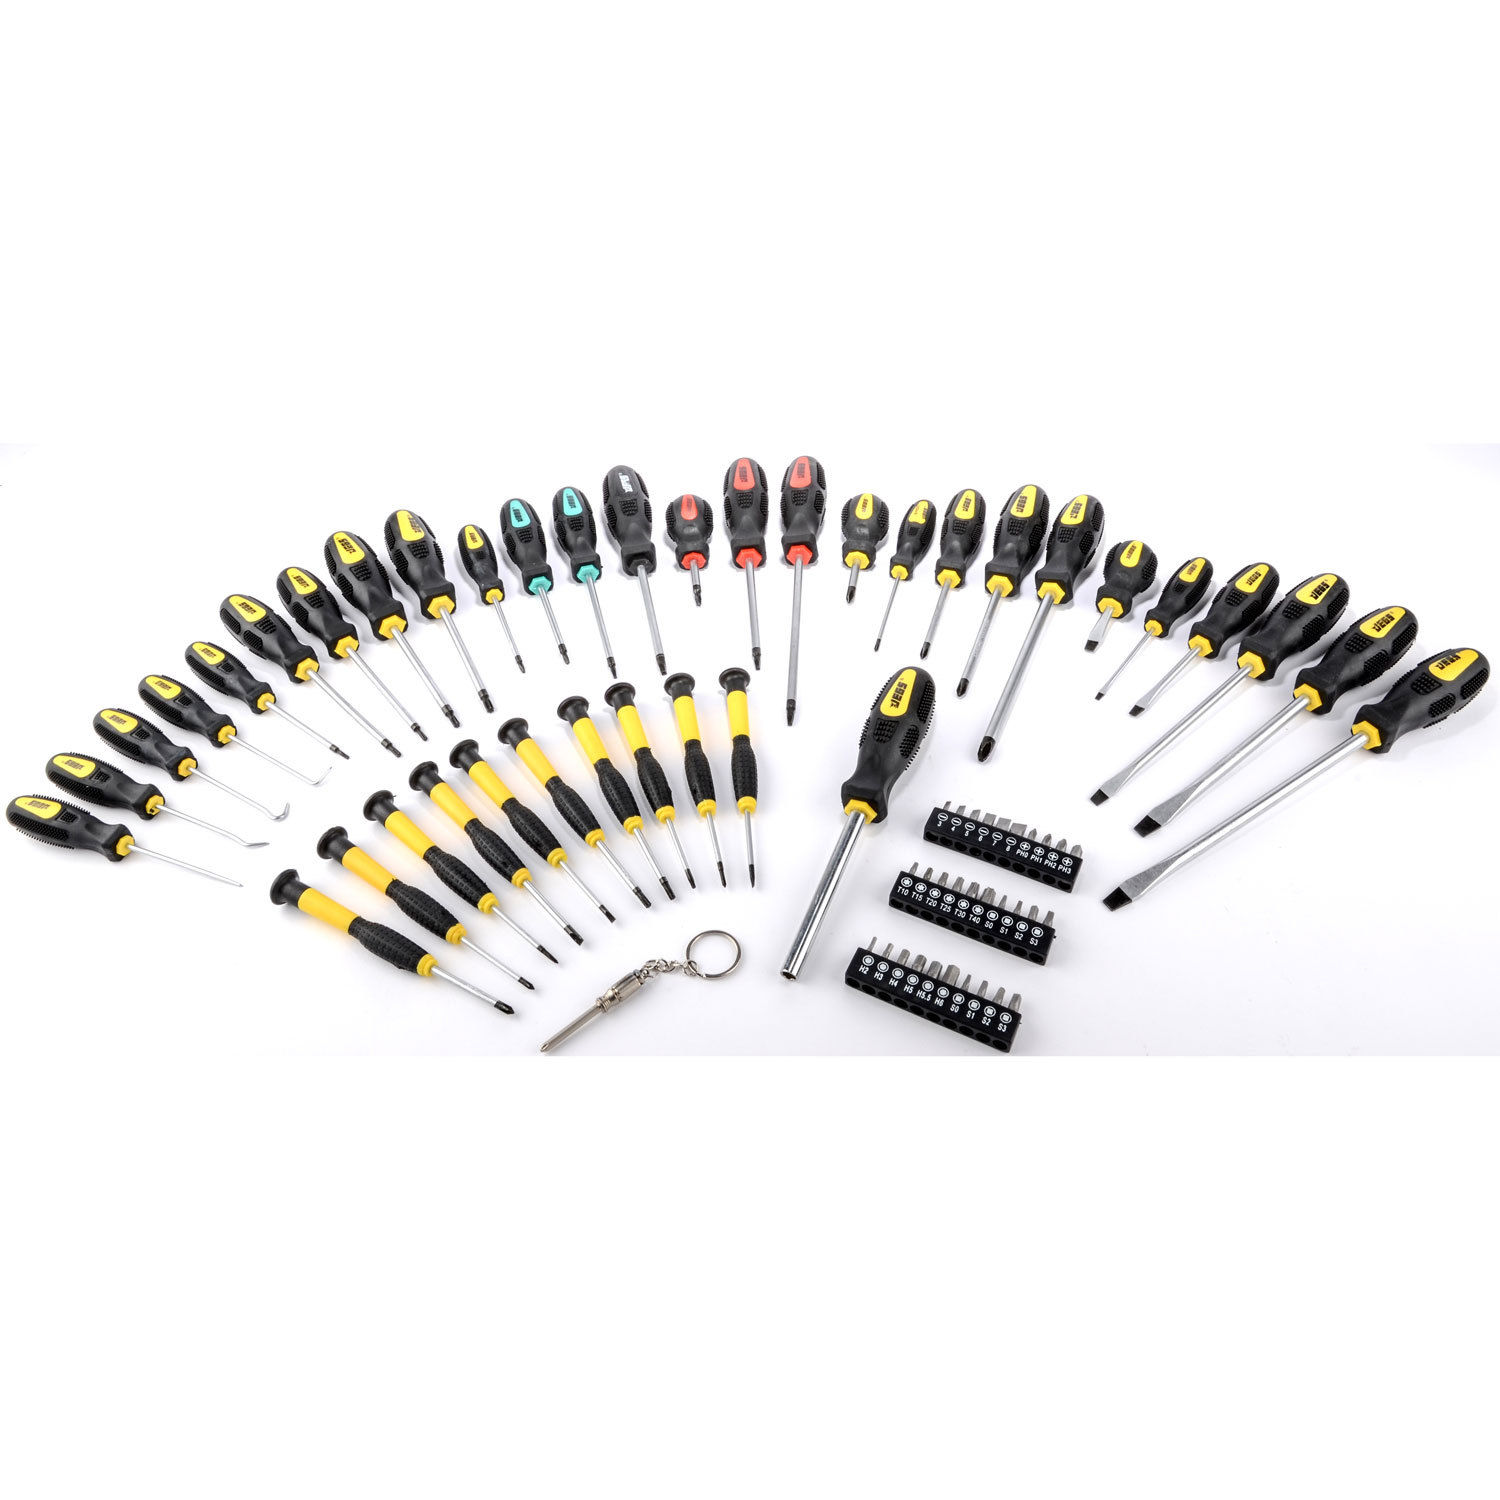 JEGS 69-piece magnetic screwdriver set for $17, free shipping